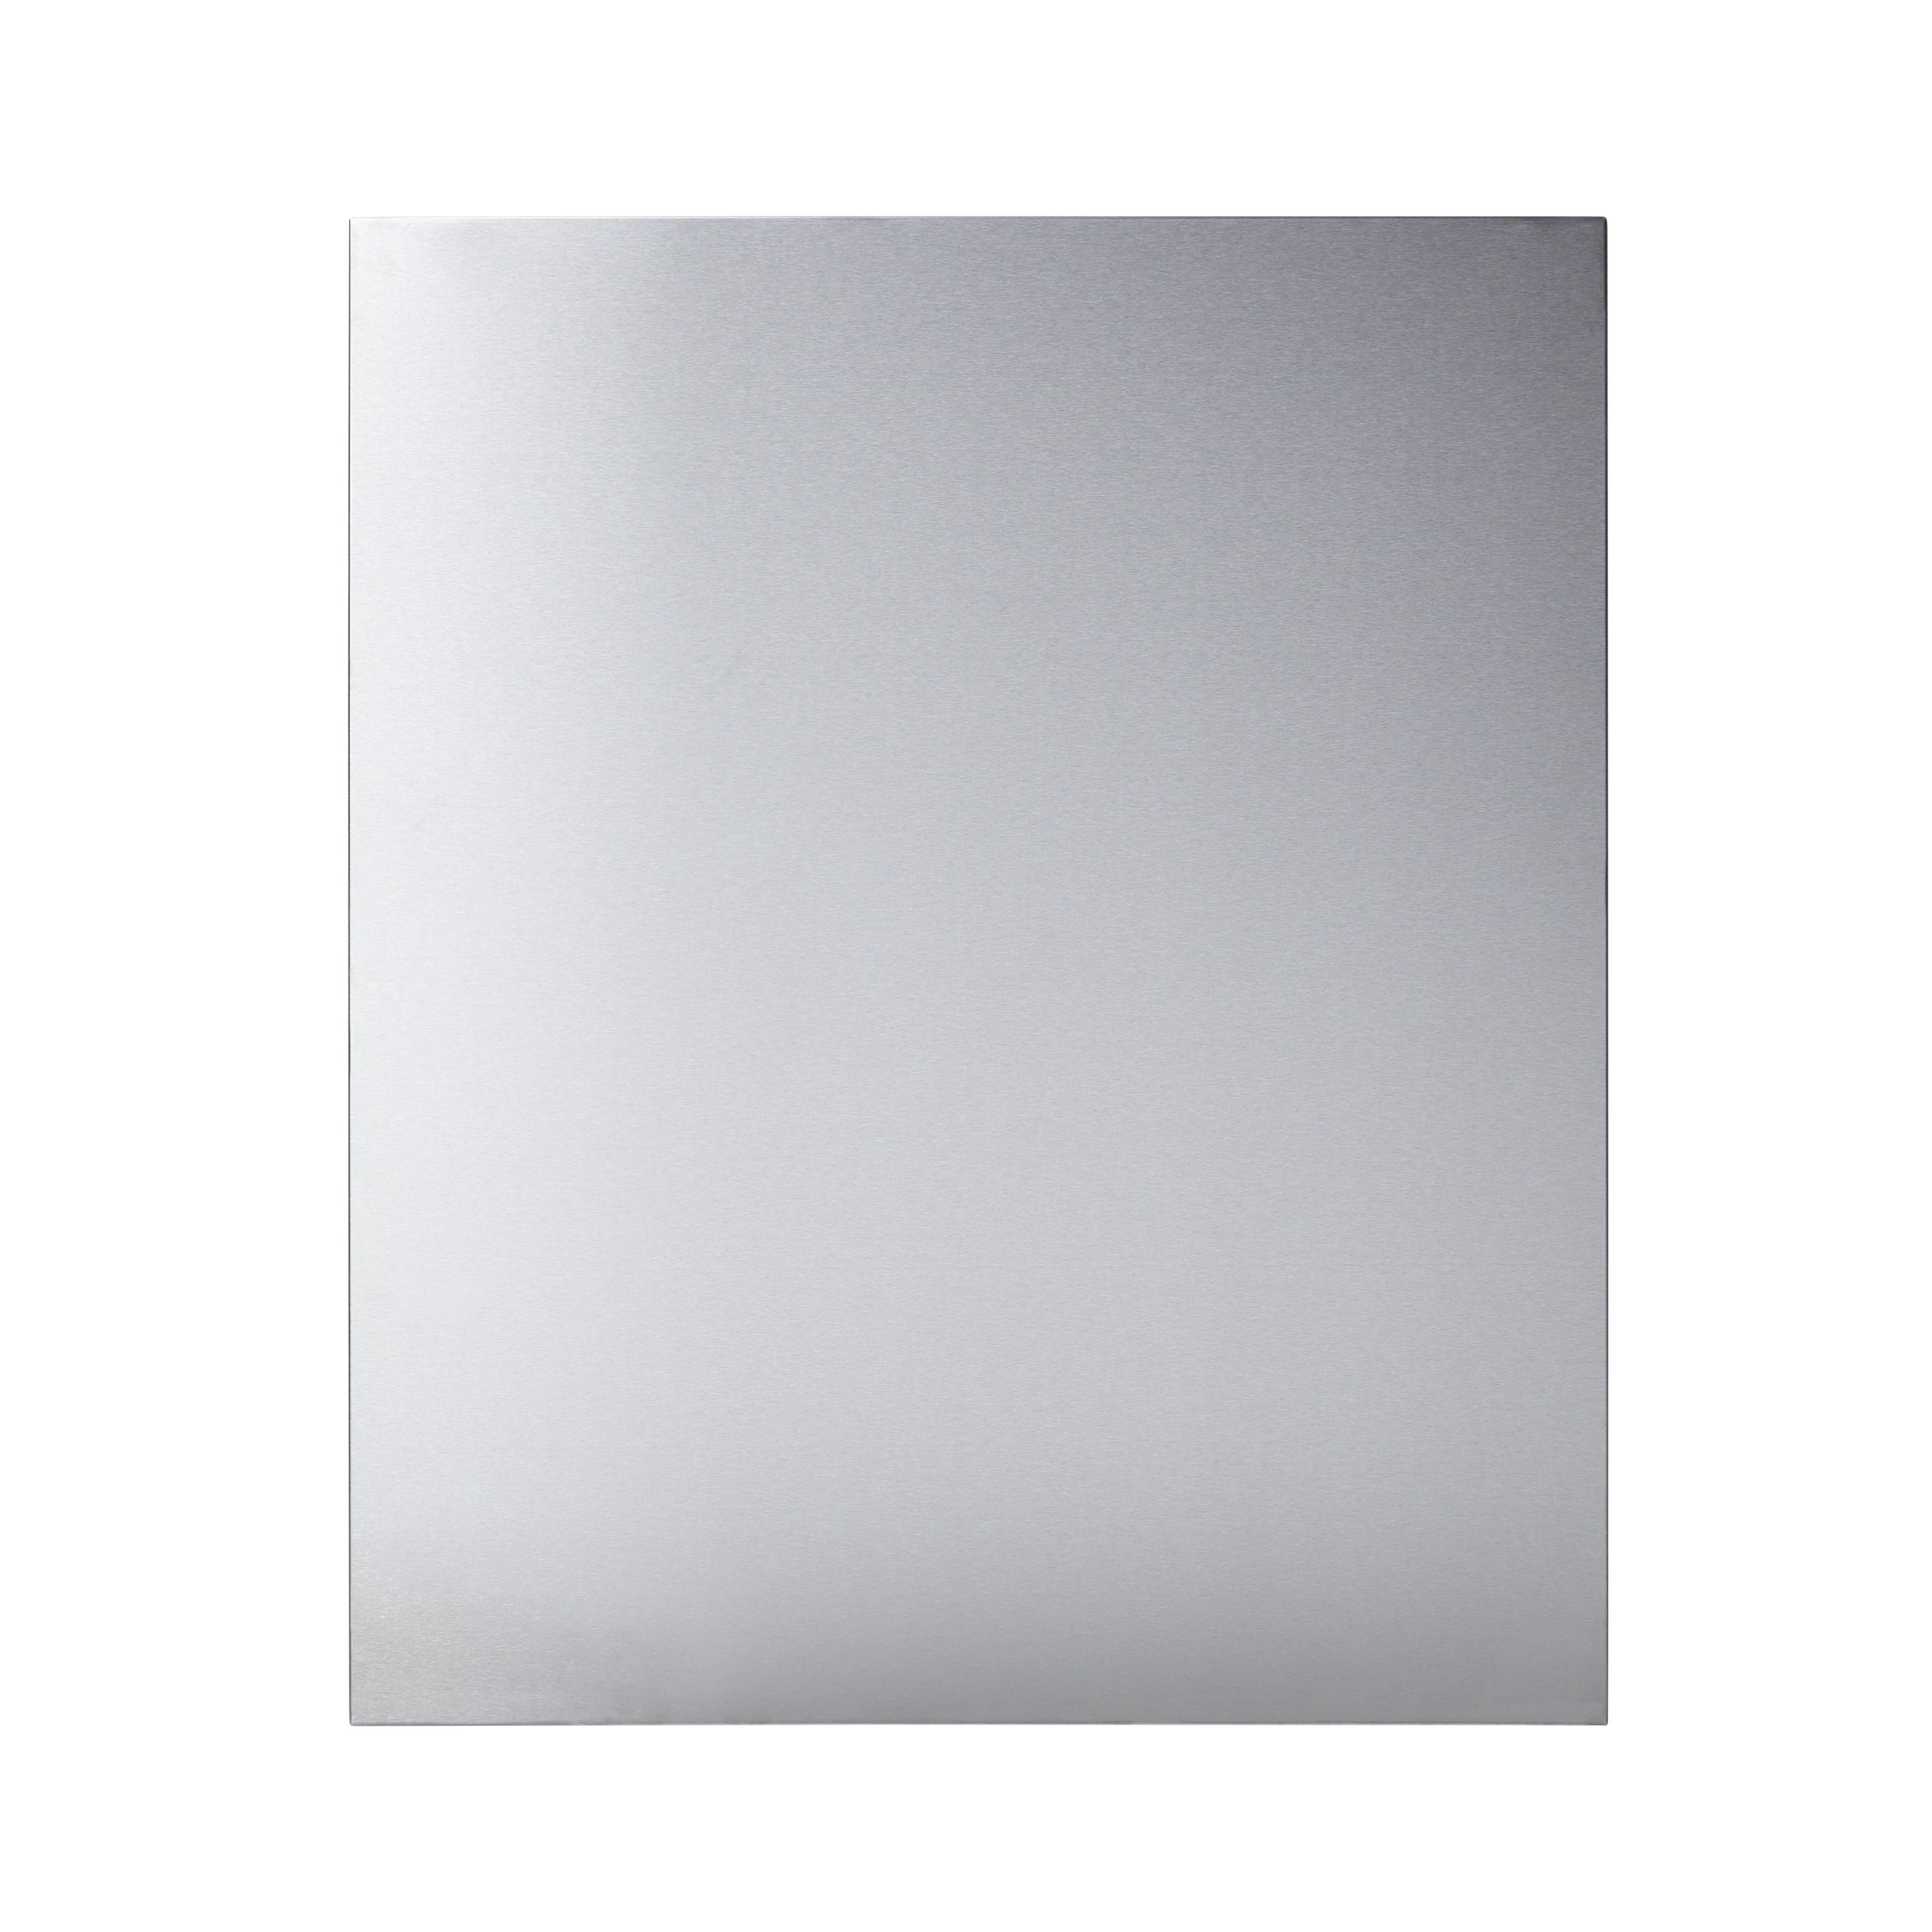 GoodHome Polished Steel Single Brushed effect Stainless steel Splashback, (H)800mm (W)600mm (T)1mm